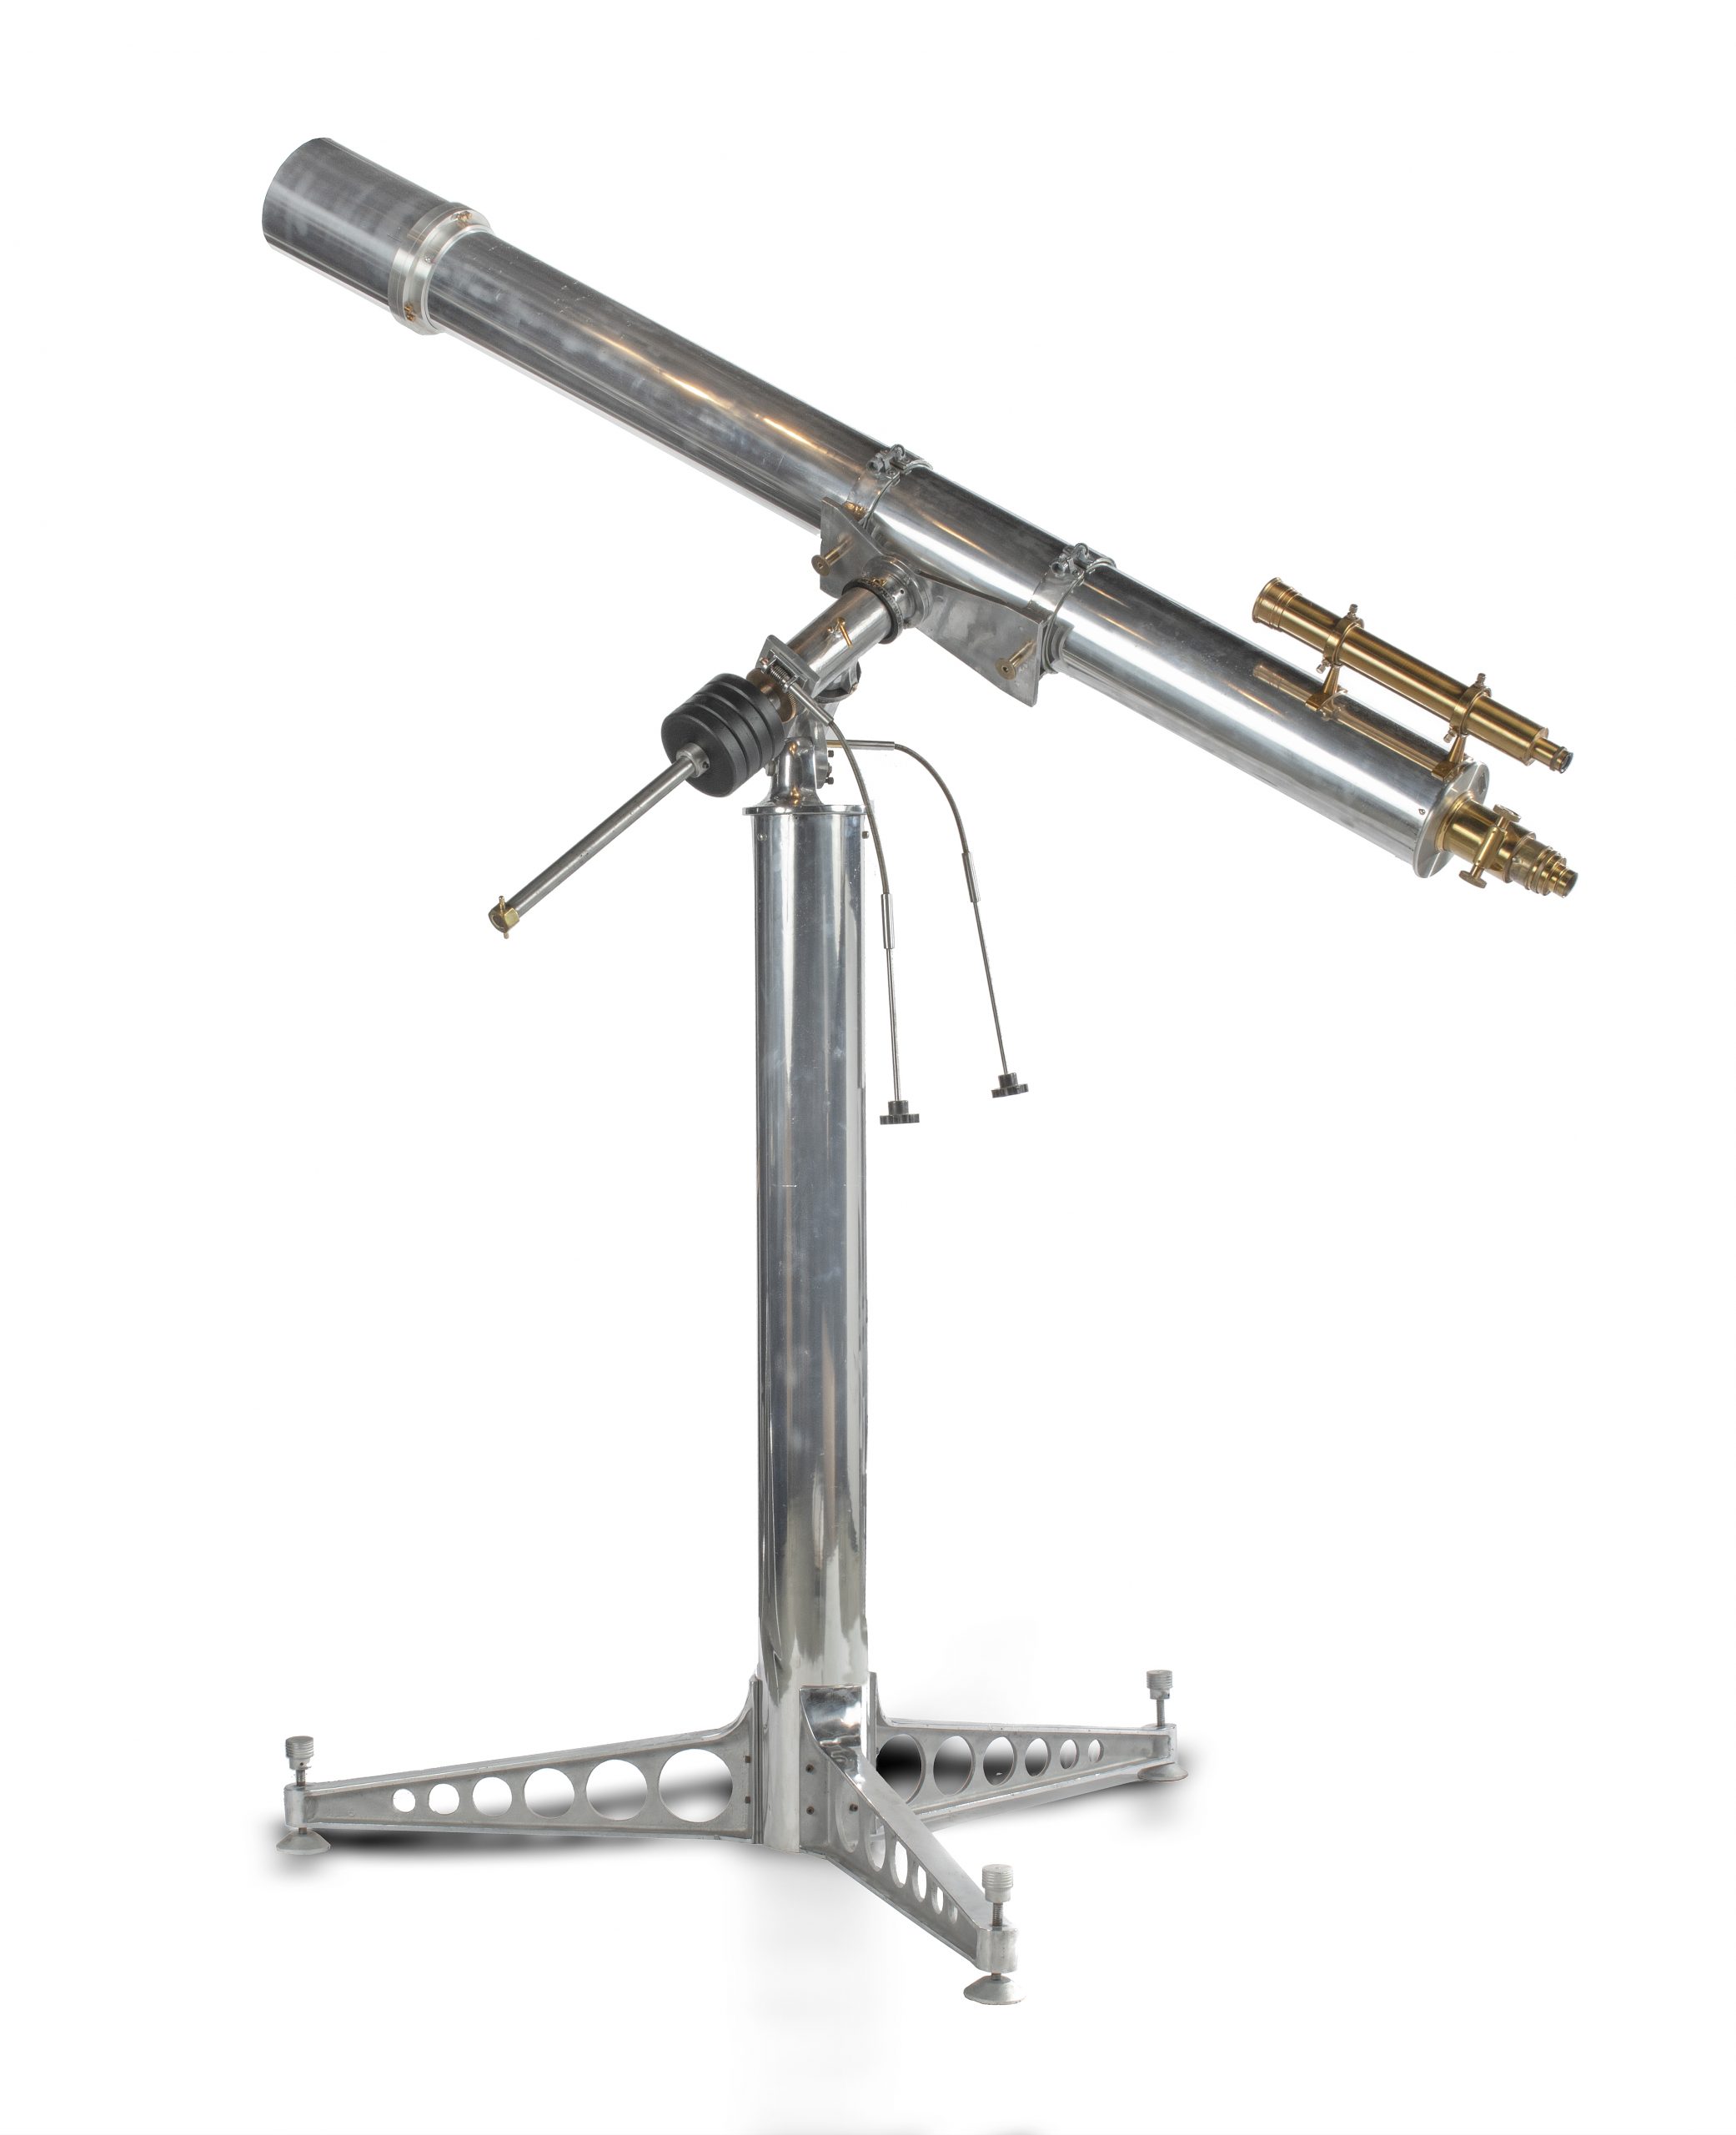 An impressive aluminium and brass 6” refracting  astronomical Telescope by Irving & Sons